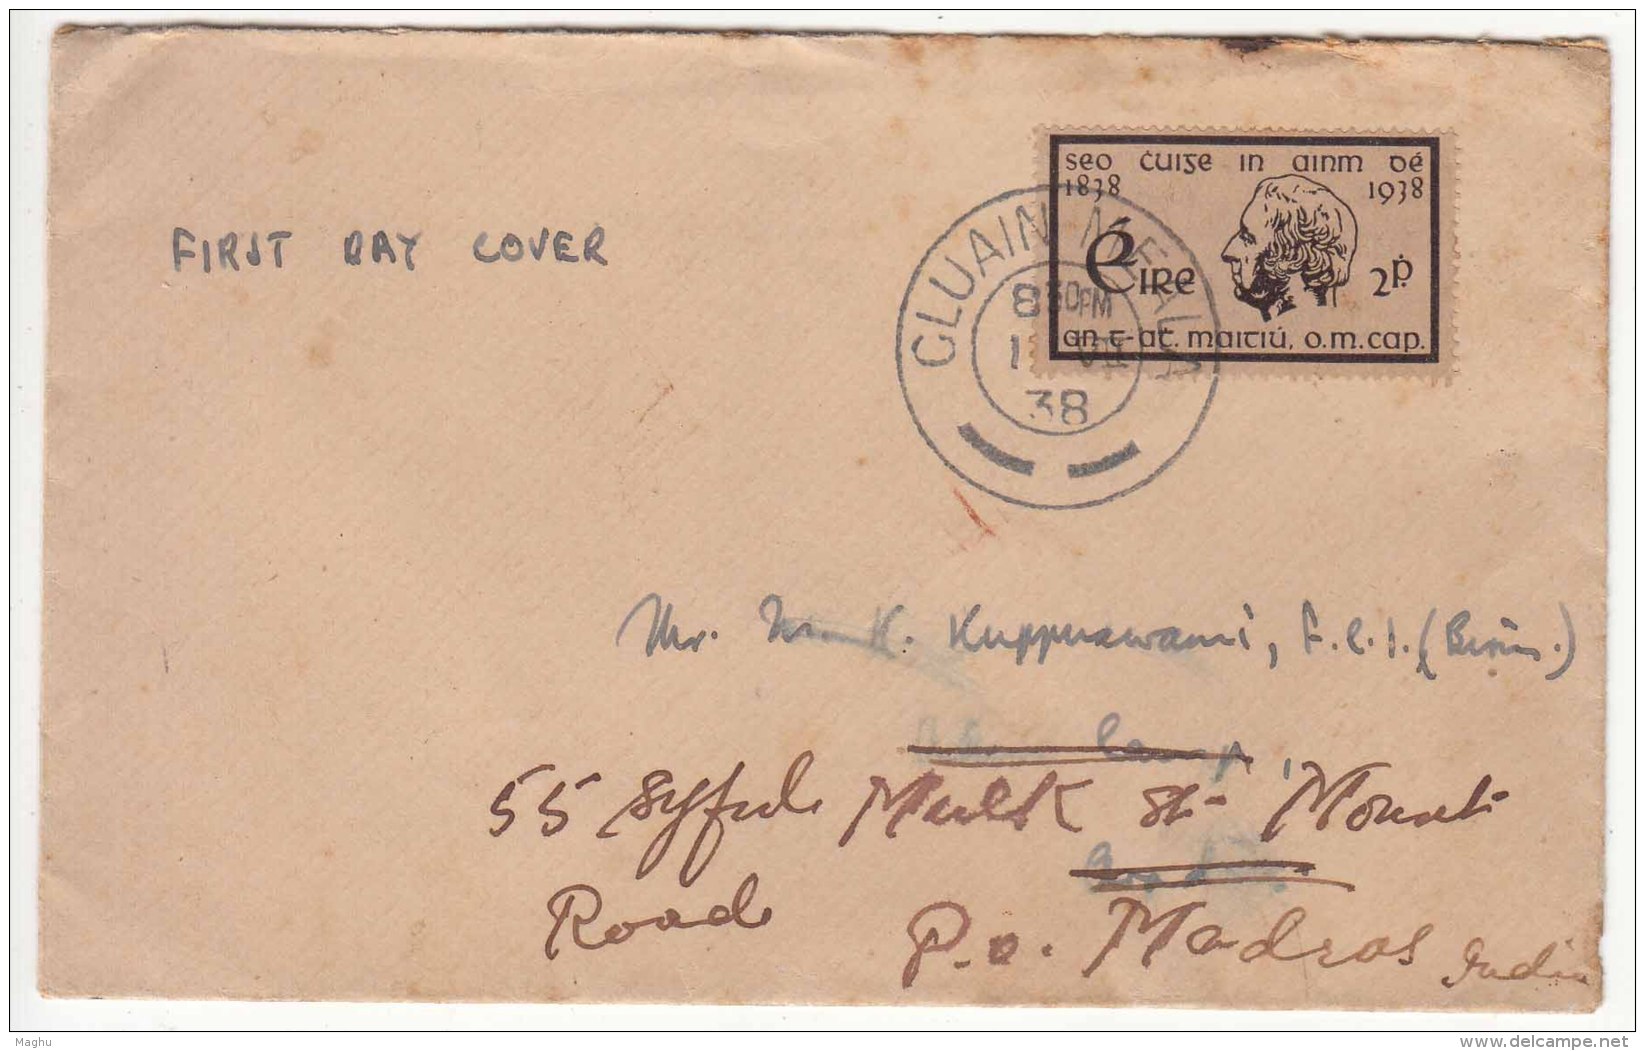 FDC 1938 Ireland Used, Mather Mathew, To Aden, Redirect To India - FDC